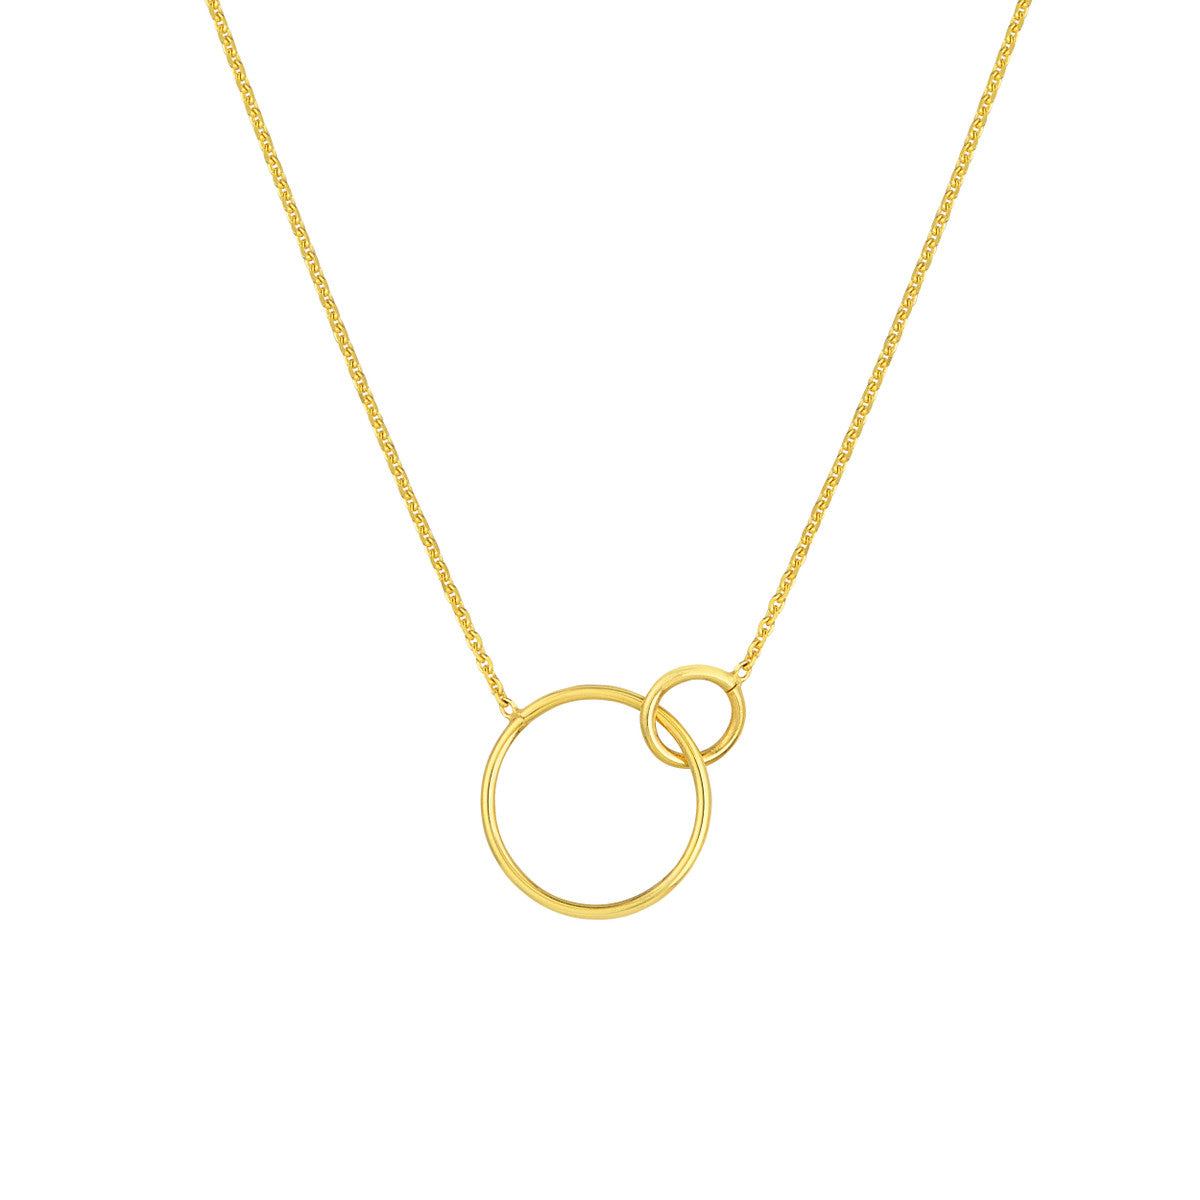 14k Real Gold Interlocking Circles Necklace for Women,Double Rings Necklaces  in 14k Gold,Intertwined Circles Pendant Necklaces,Delicate Round  Jewelry,Gifts for Anniversary, 18